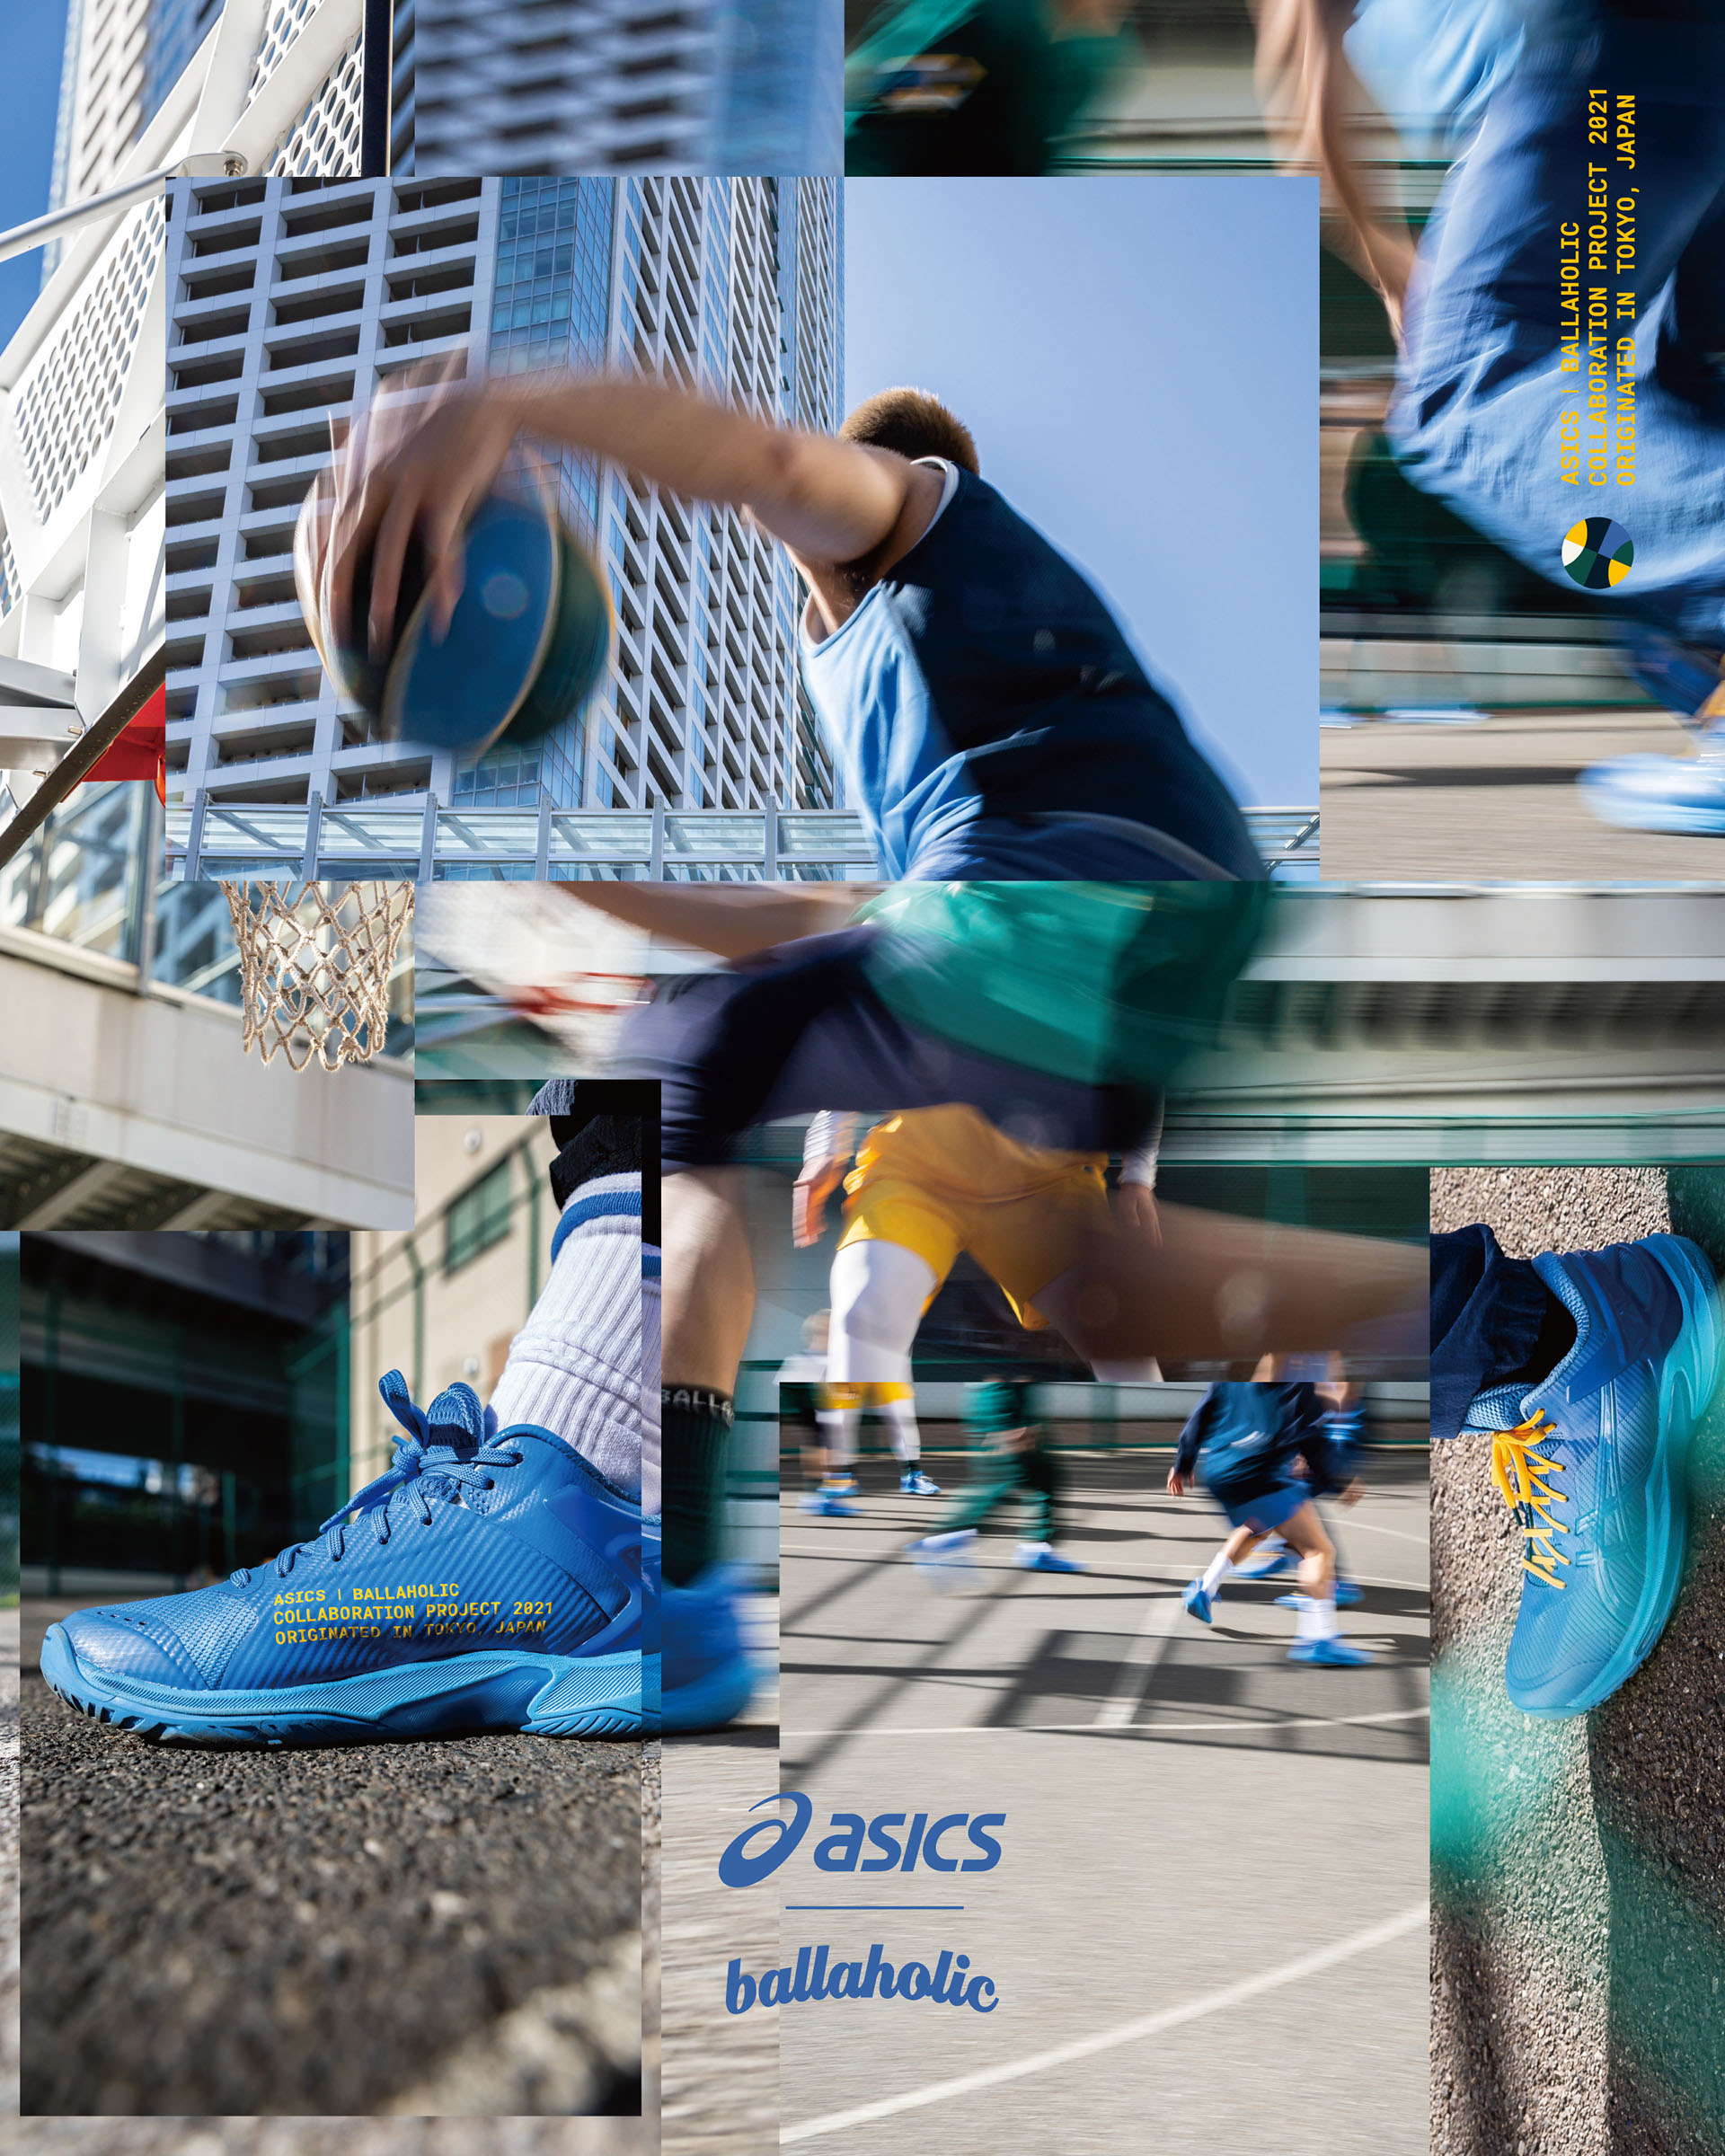 ASICS x ballaholic Collaboration Project ｜ FLY BASKETBALL CULTURE 